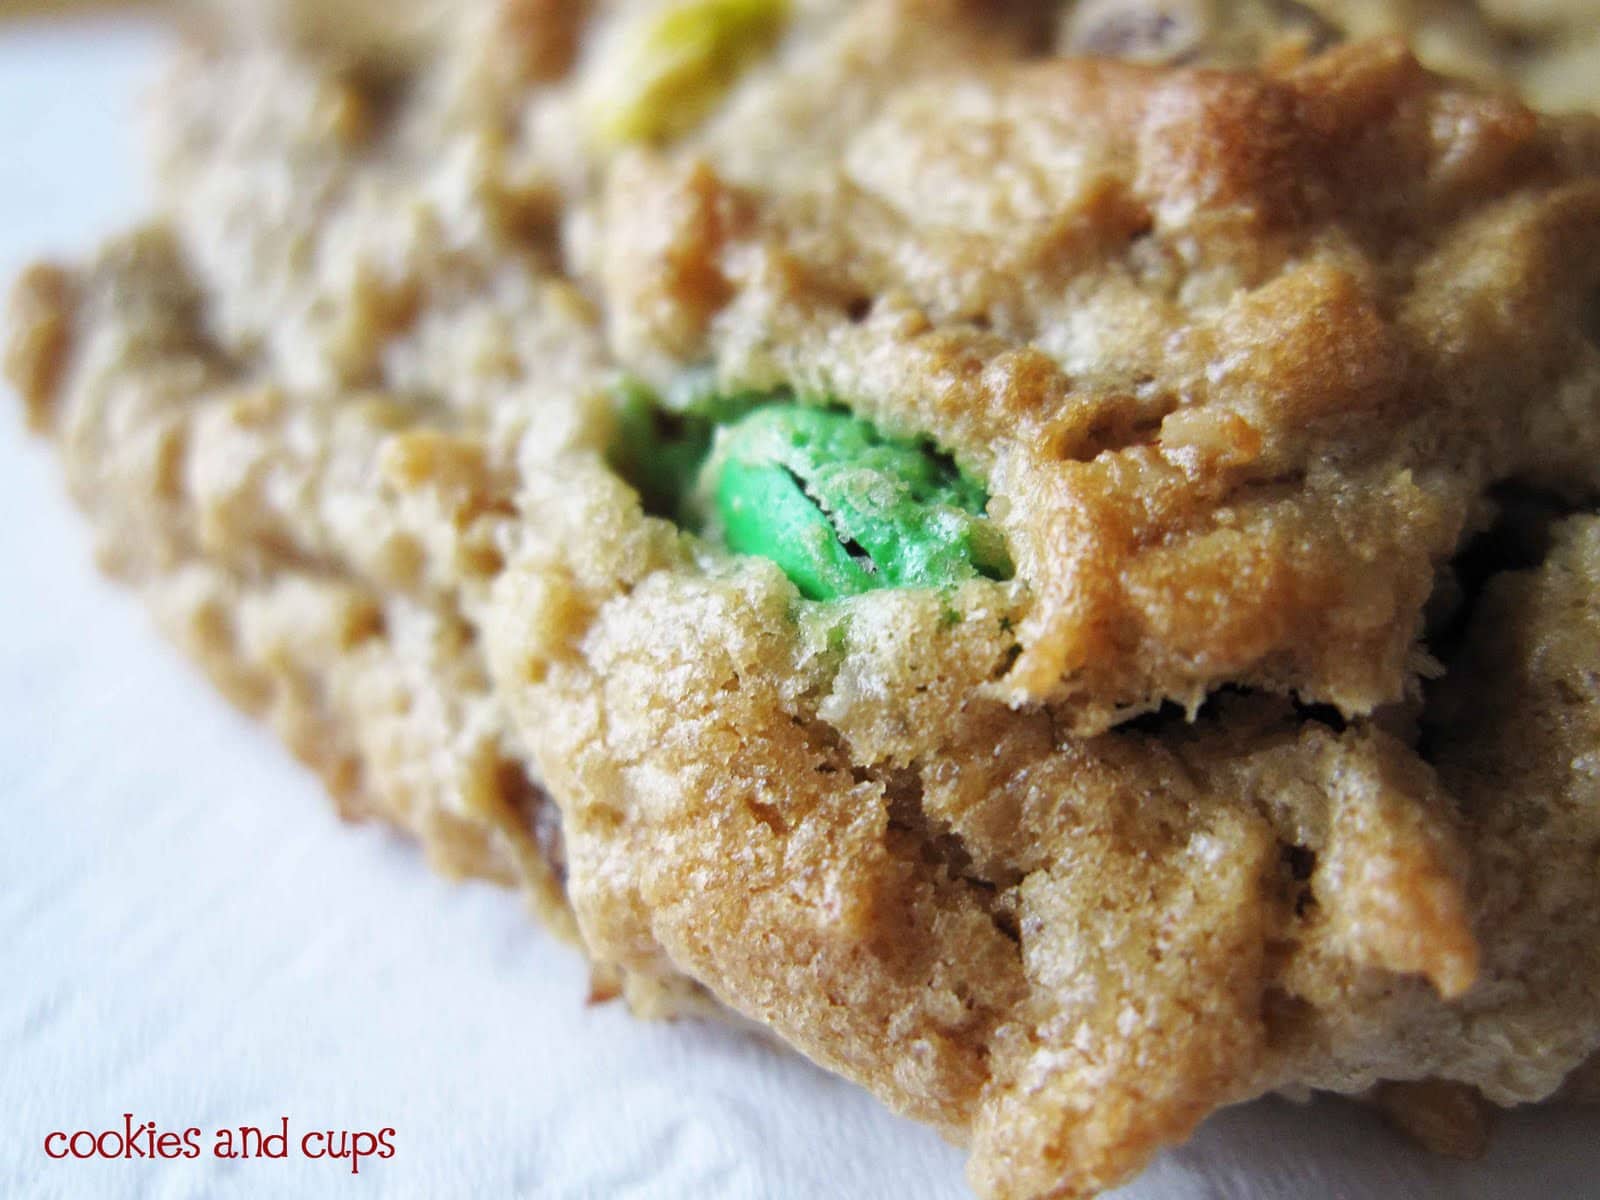 Close-up of a monster cookie